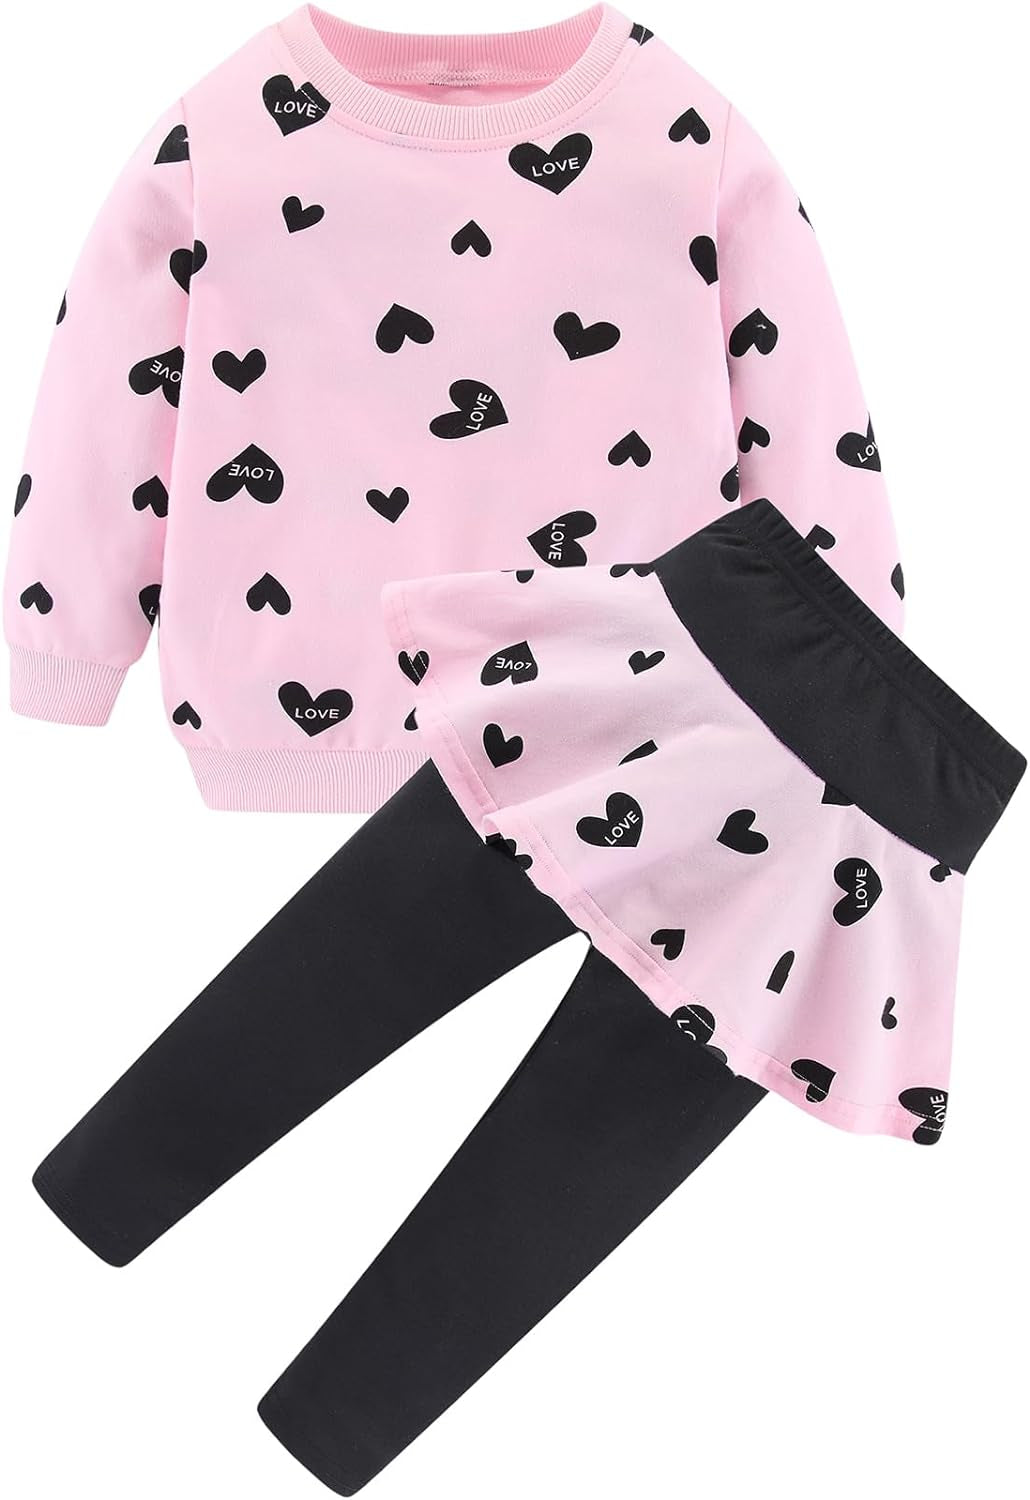 Adorable Cute Toddler Baby Girls Clothes Set,Long Sleeve T-Shirt +Pants Outfit